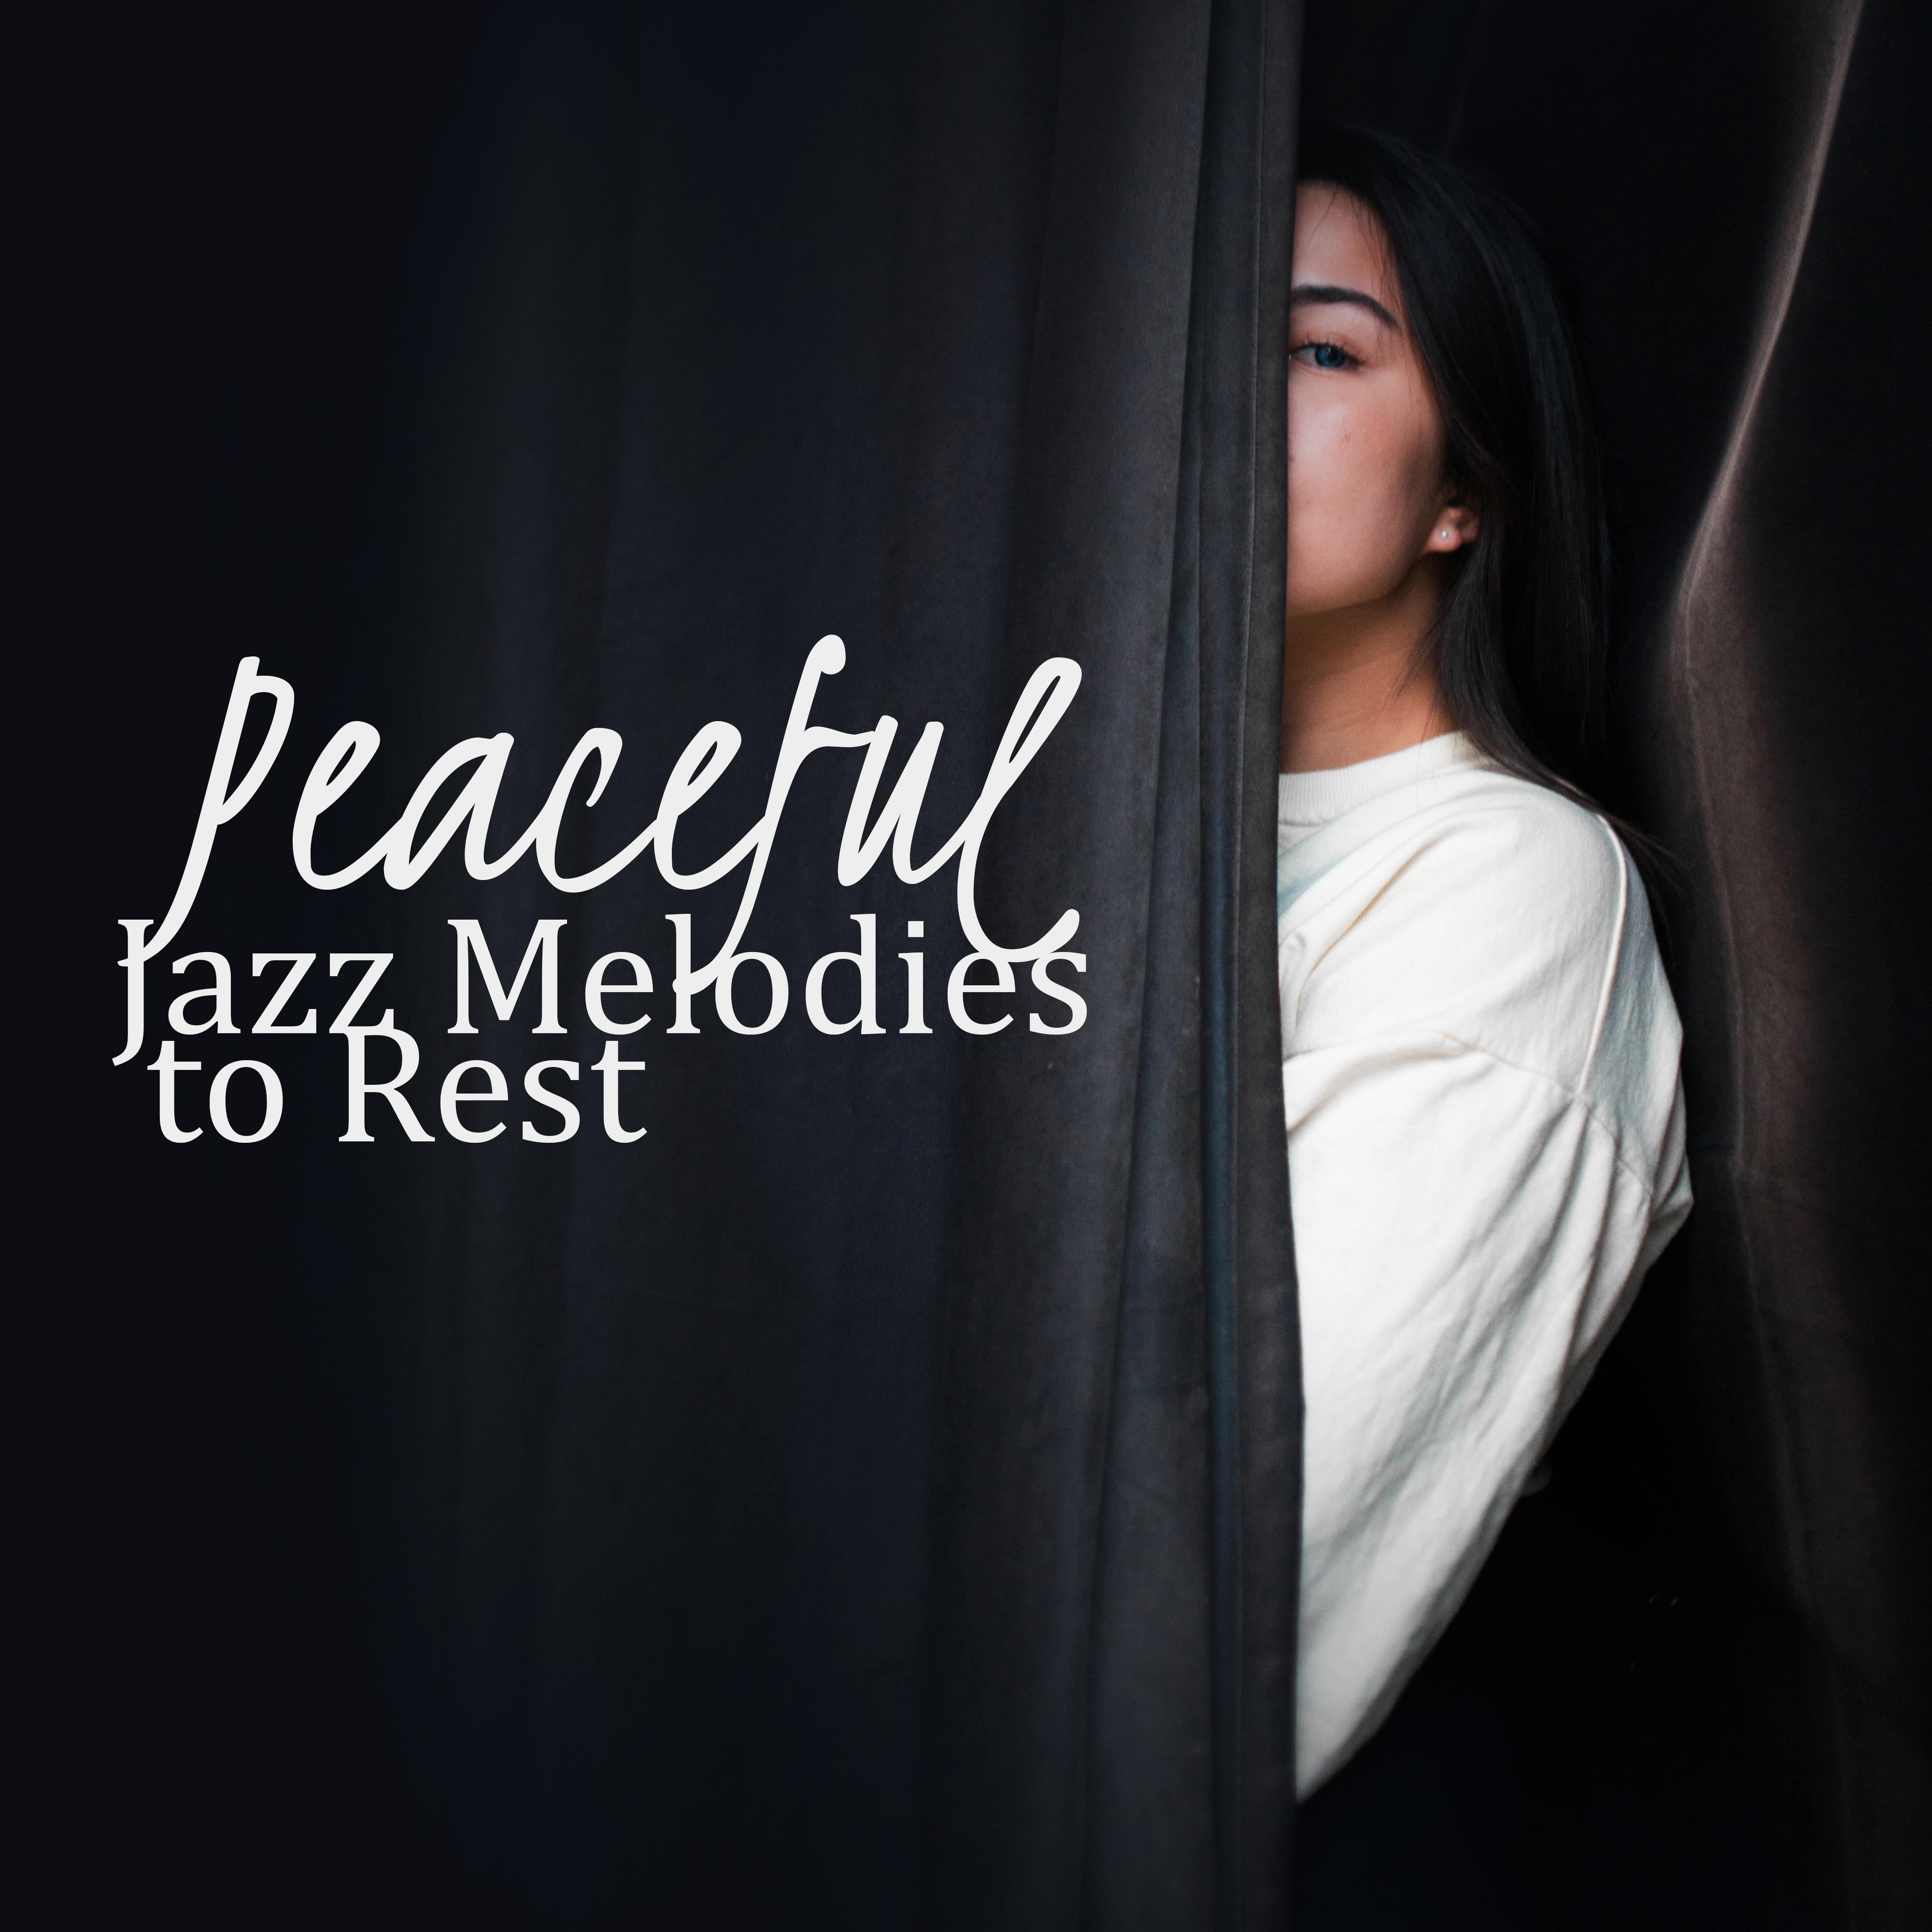 Peaceful Jazz Melodies to Rest